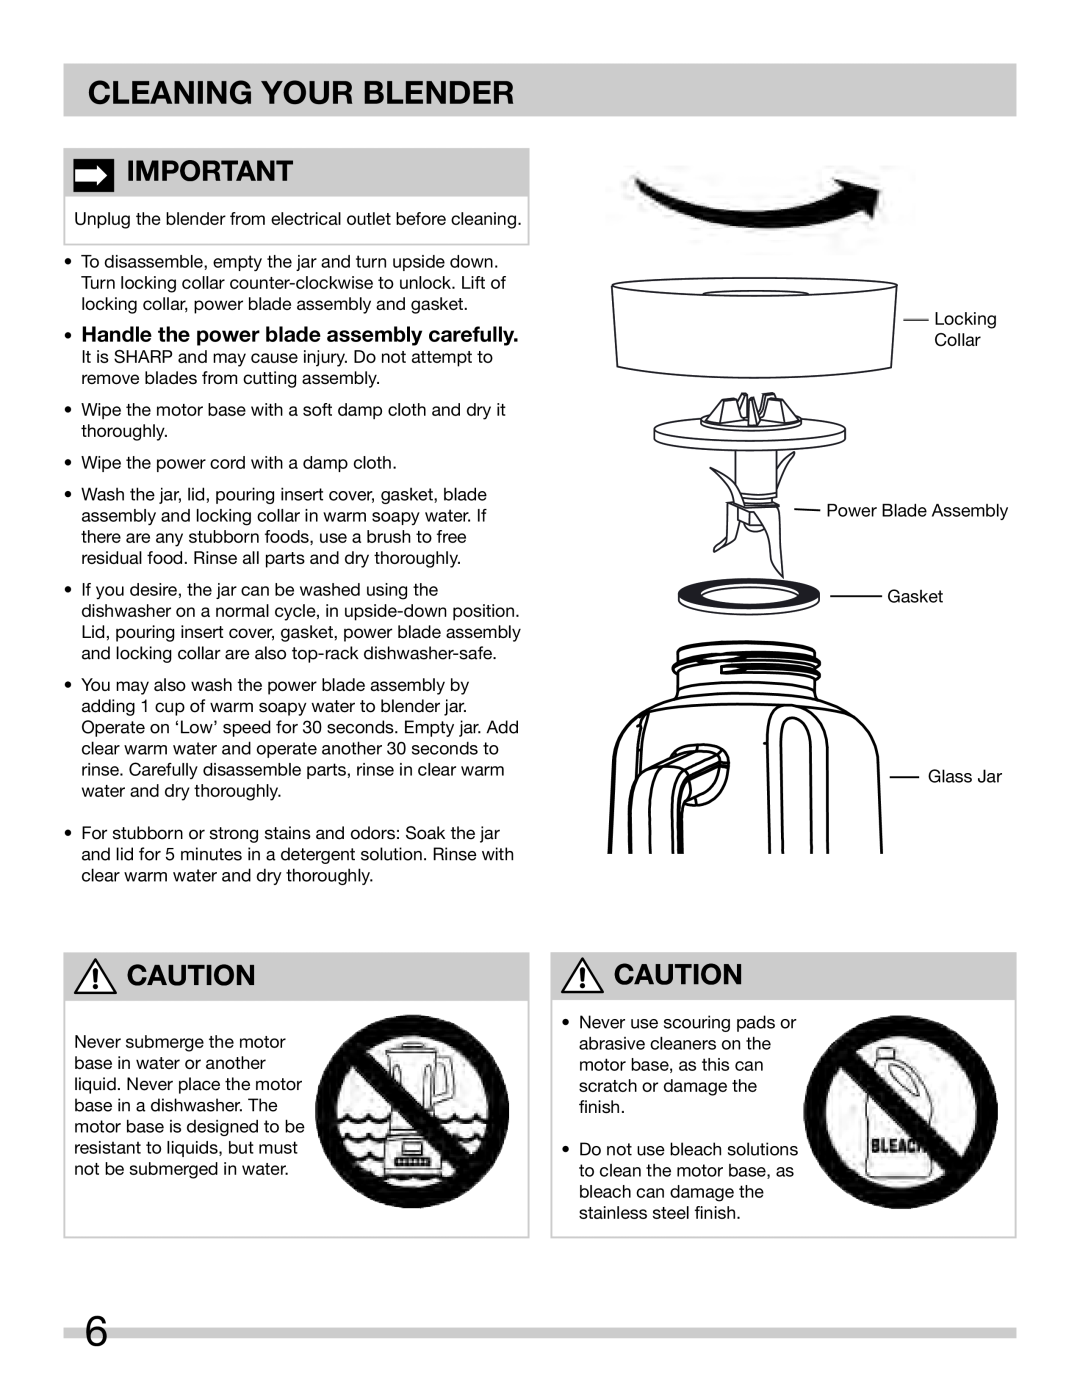 Frigidaire 900253211-UM warranty Cleaning Your Blender, Handle the power blade assembly carefully 